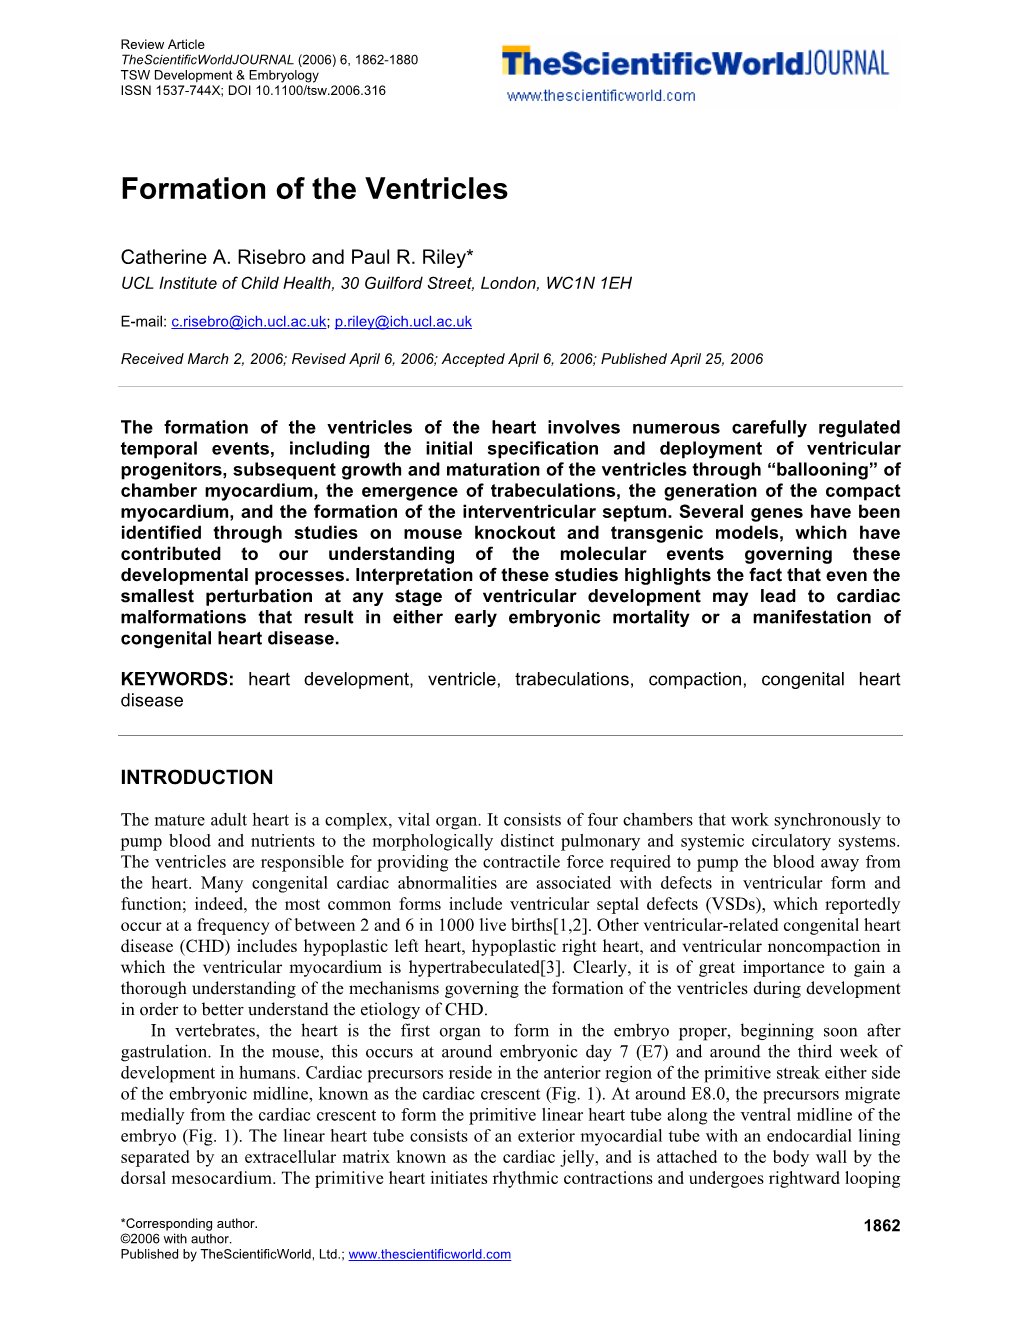 Formation of the Ventricles